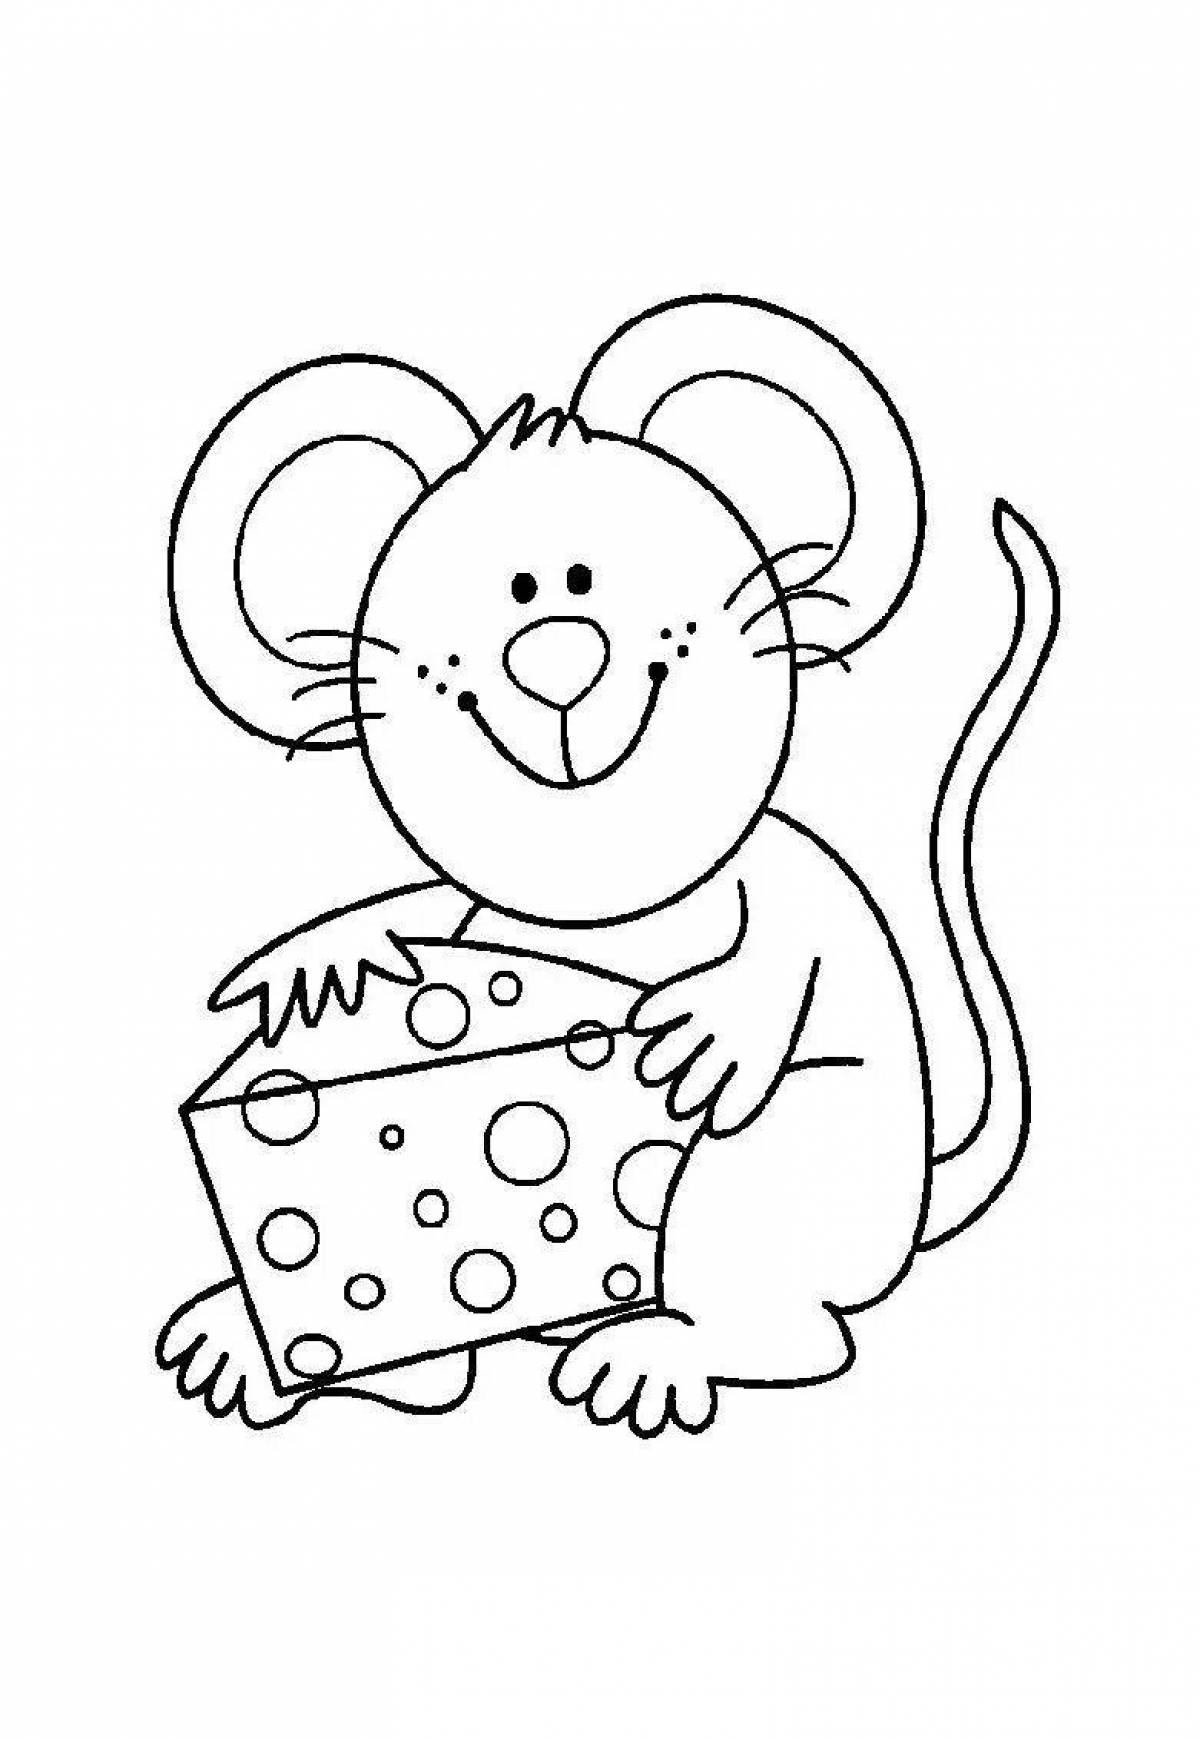 Colorful coloring mouse for children